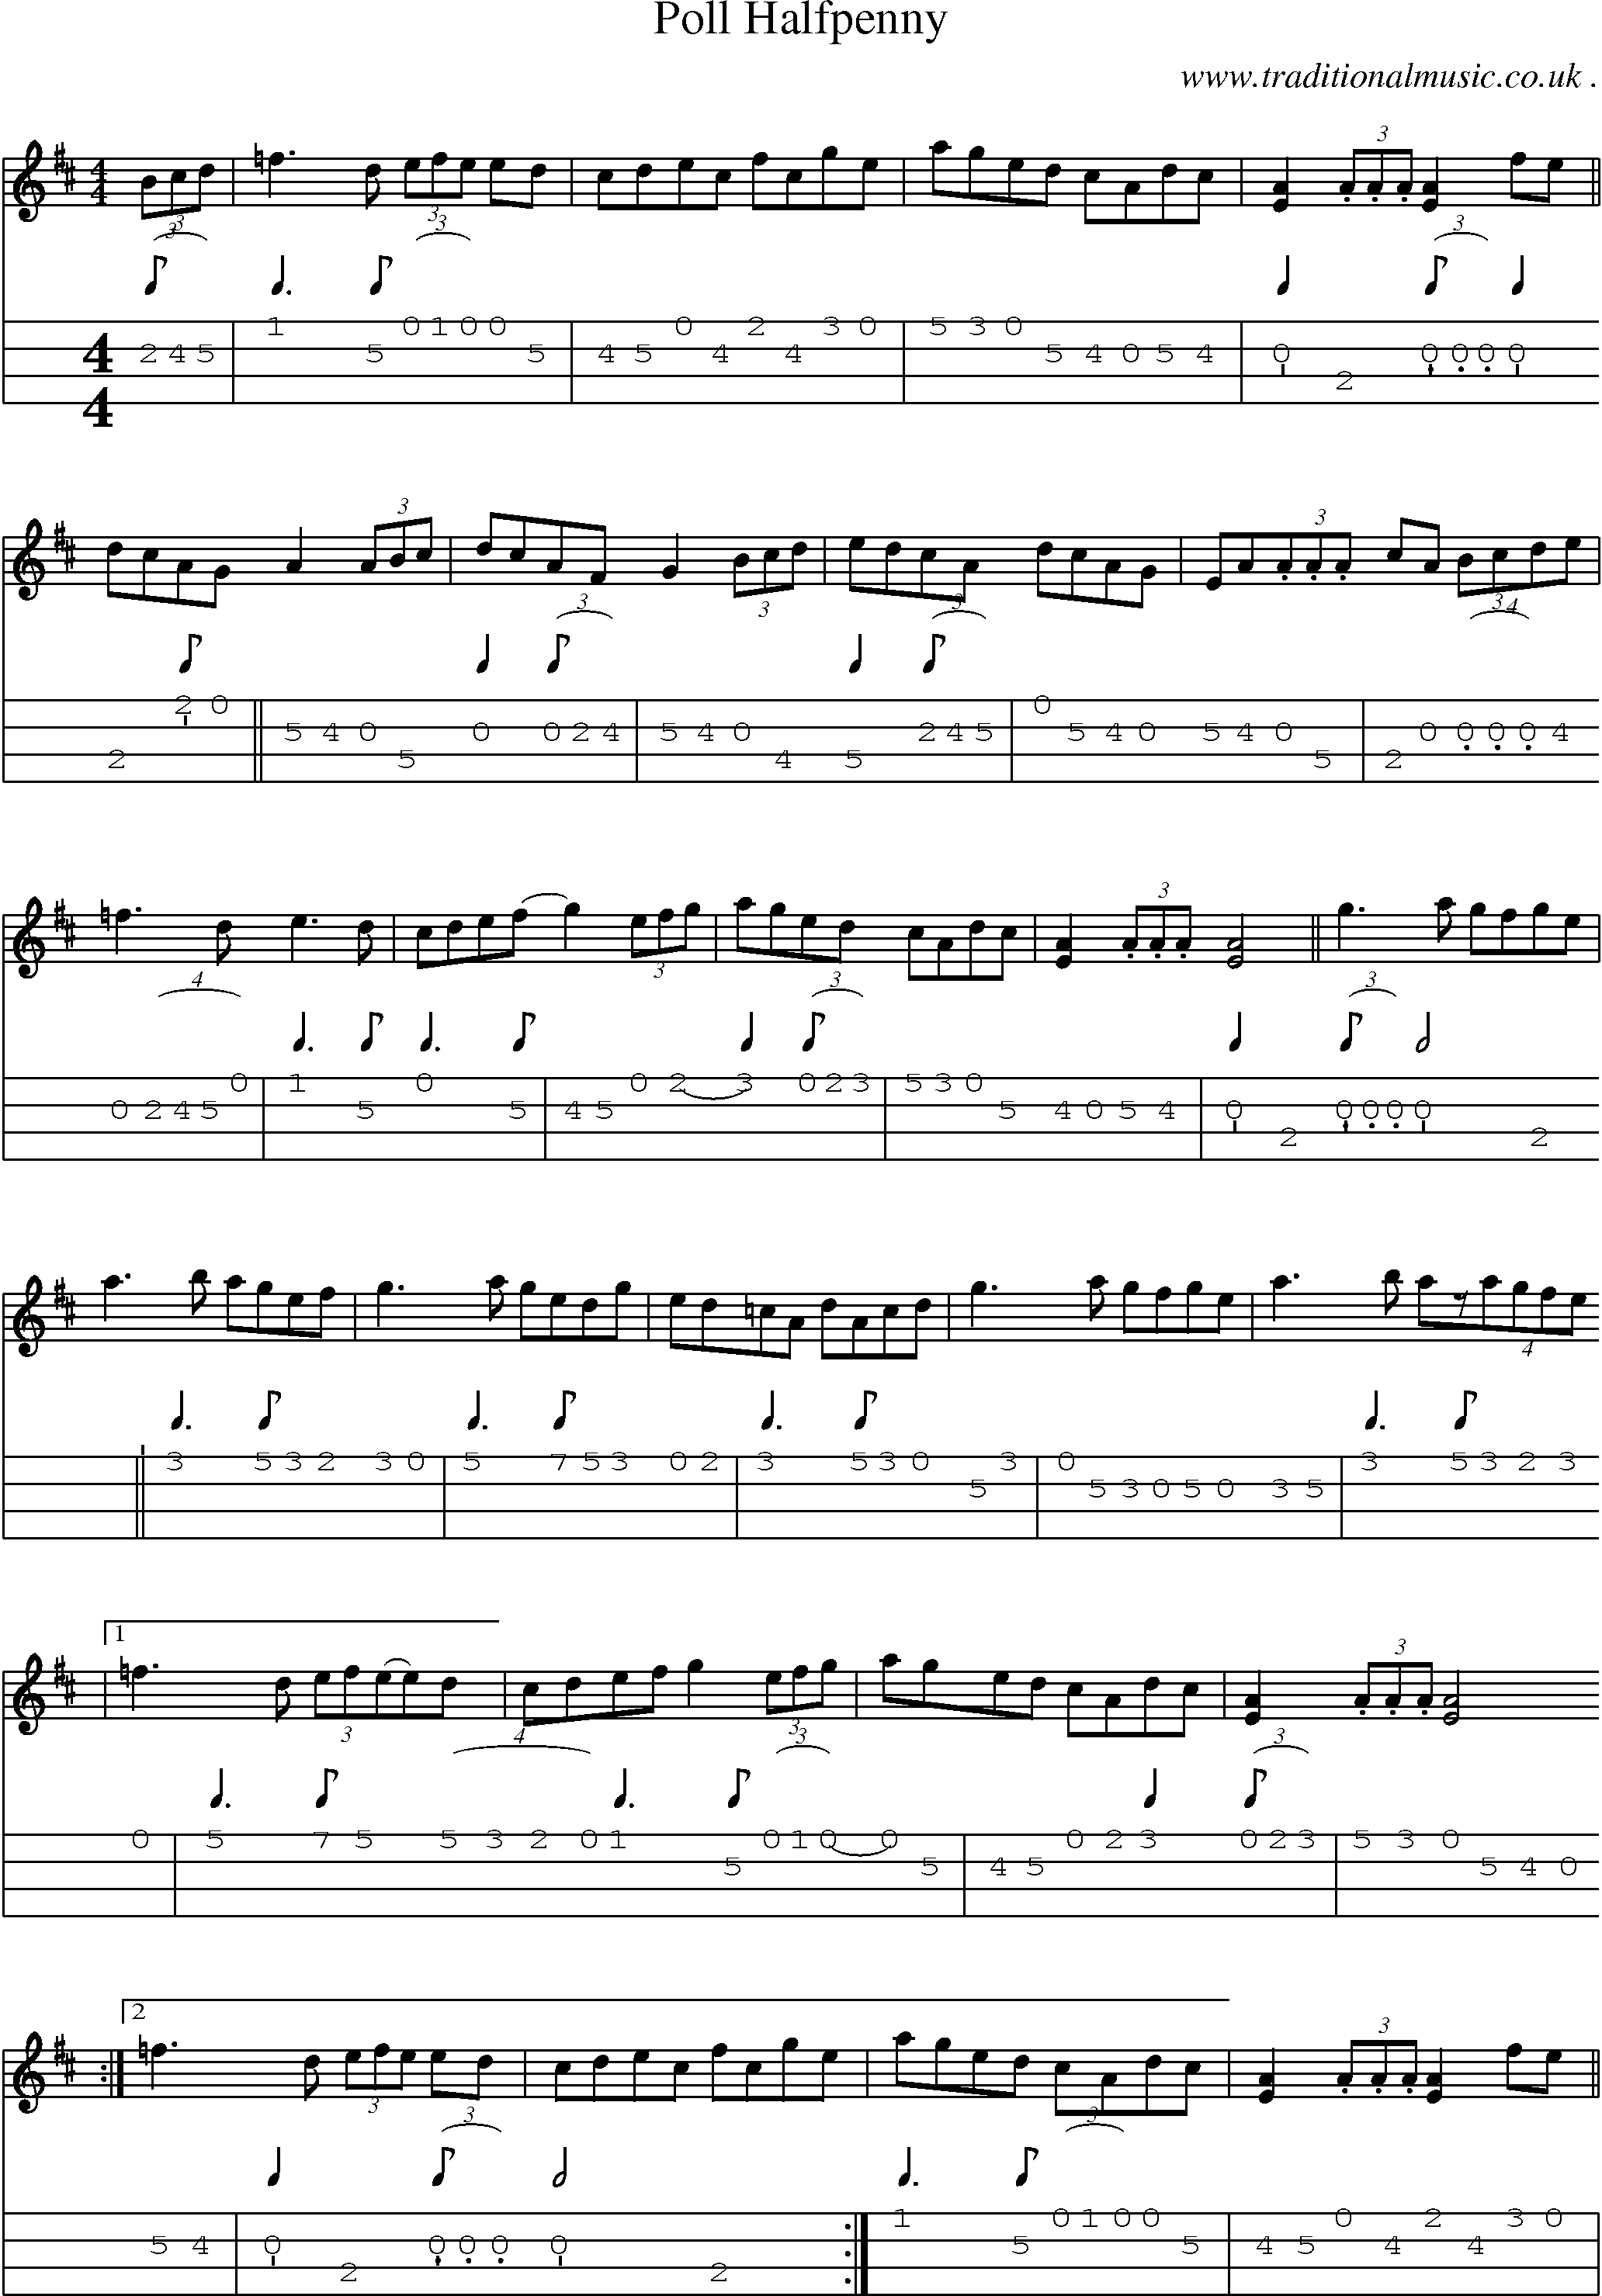 Sheet-Music and Mandolin Tabs for Poll Halfpenny